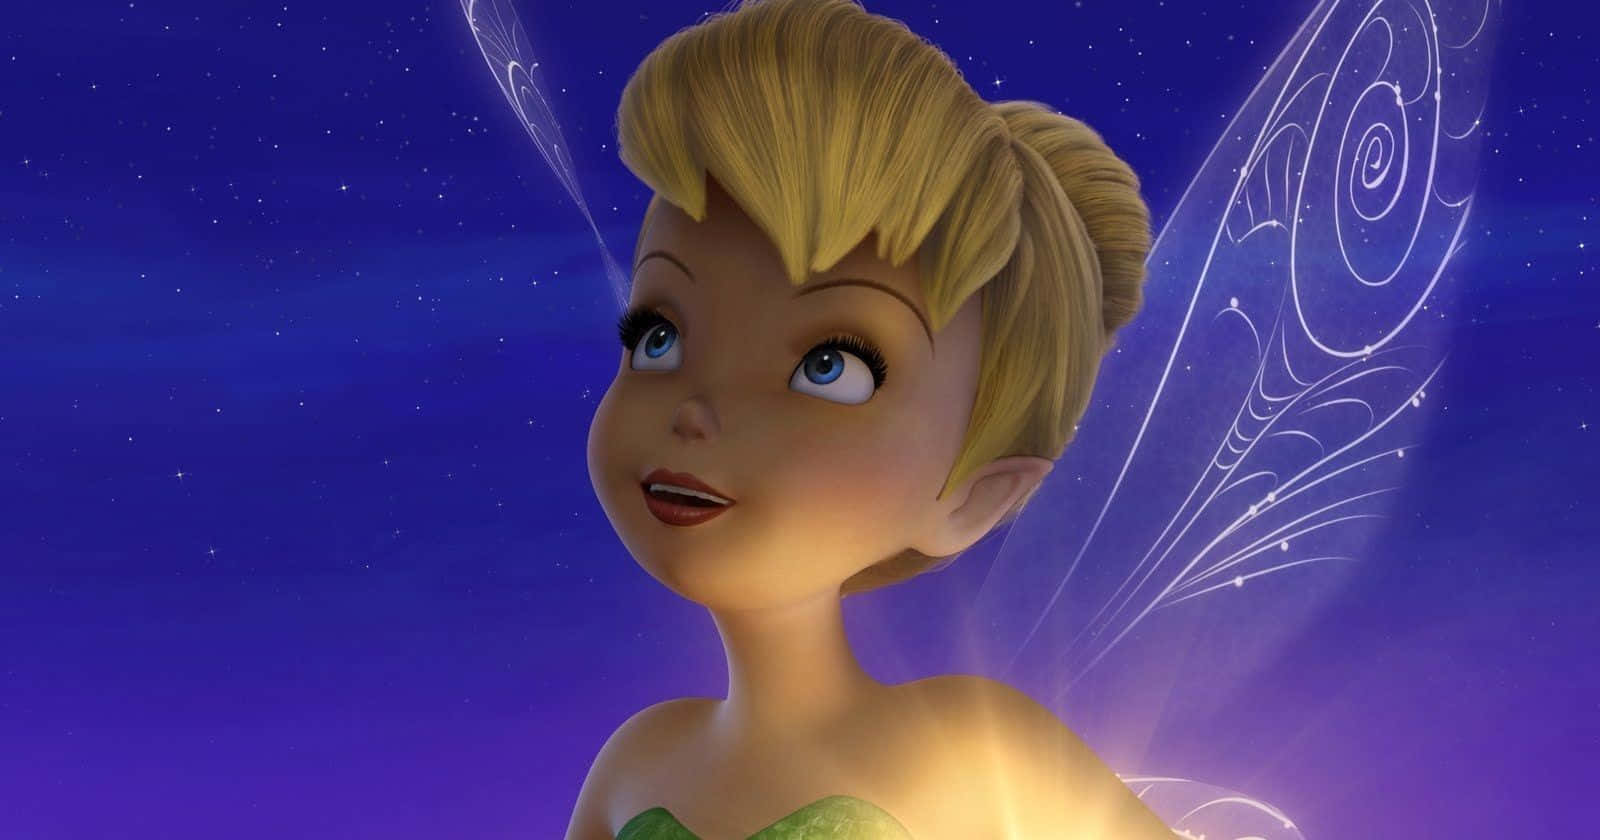 Magical Tinkerbell with a Sparkling Glow